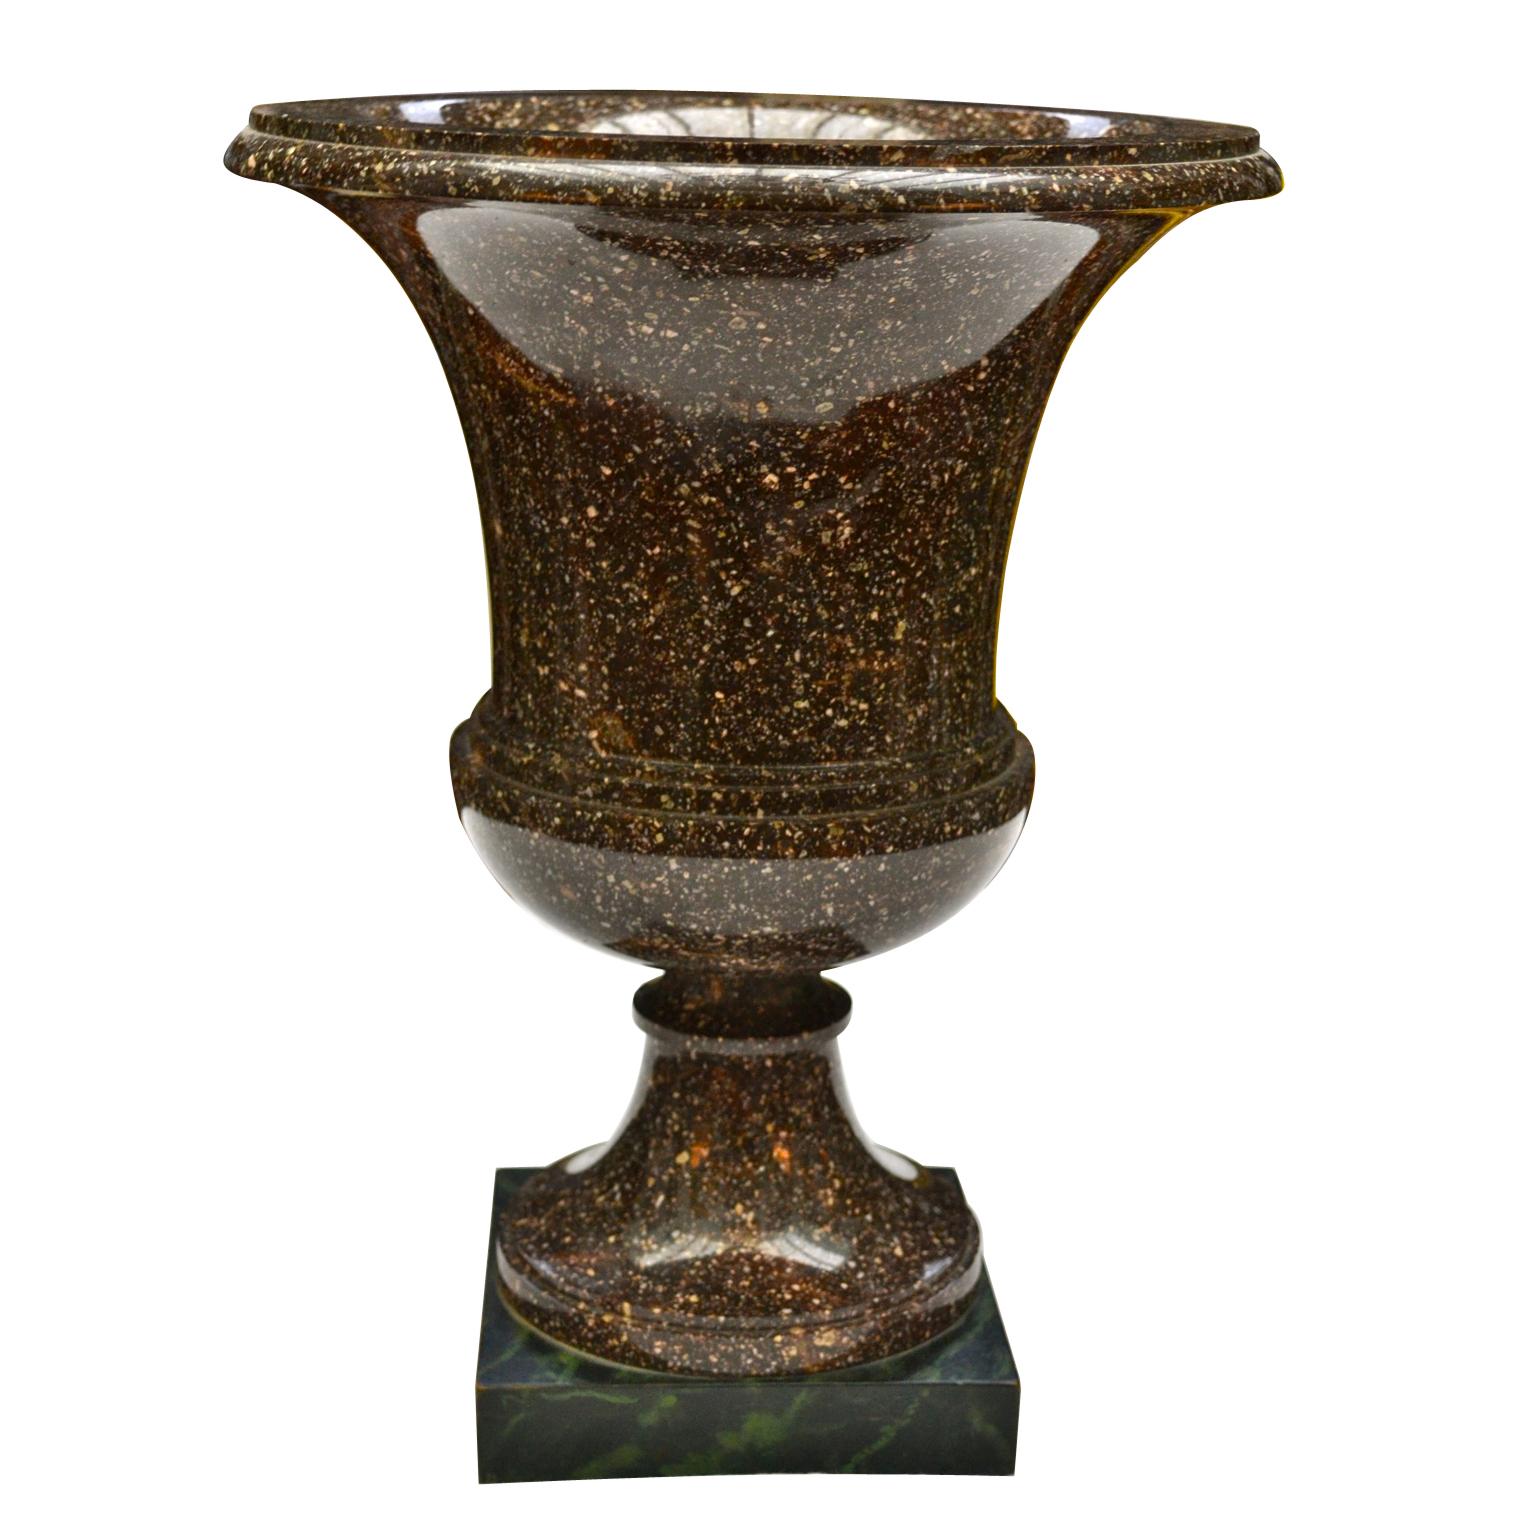 An early 19th century Swedish or Russian Porphyry campana urn vase carved in a Classic shape, likely carved by the Alvdalen factory in Sweden, the vase presently mounted on a faux green marble rectangular base,